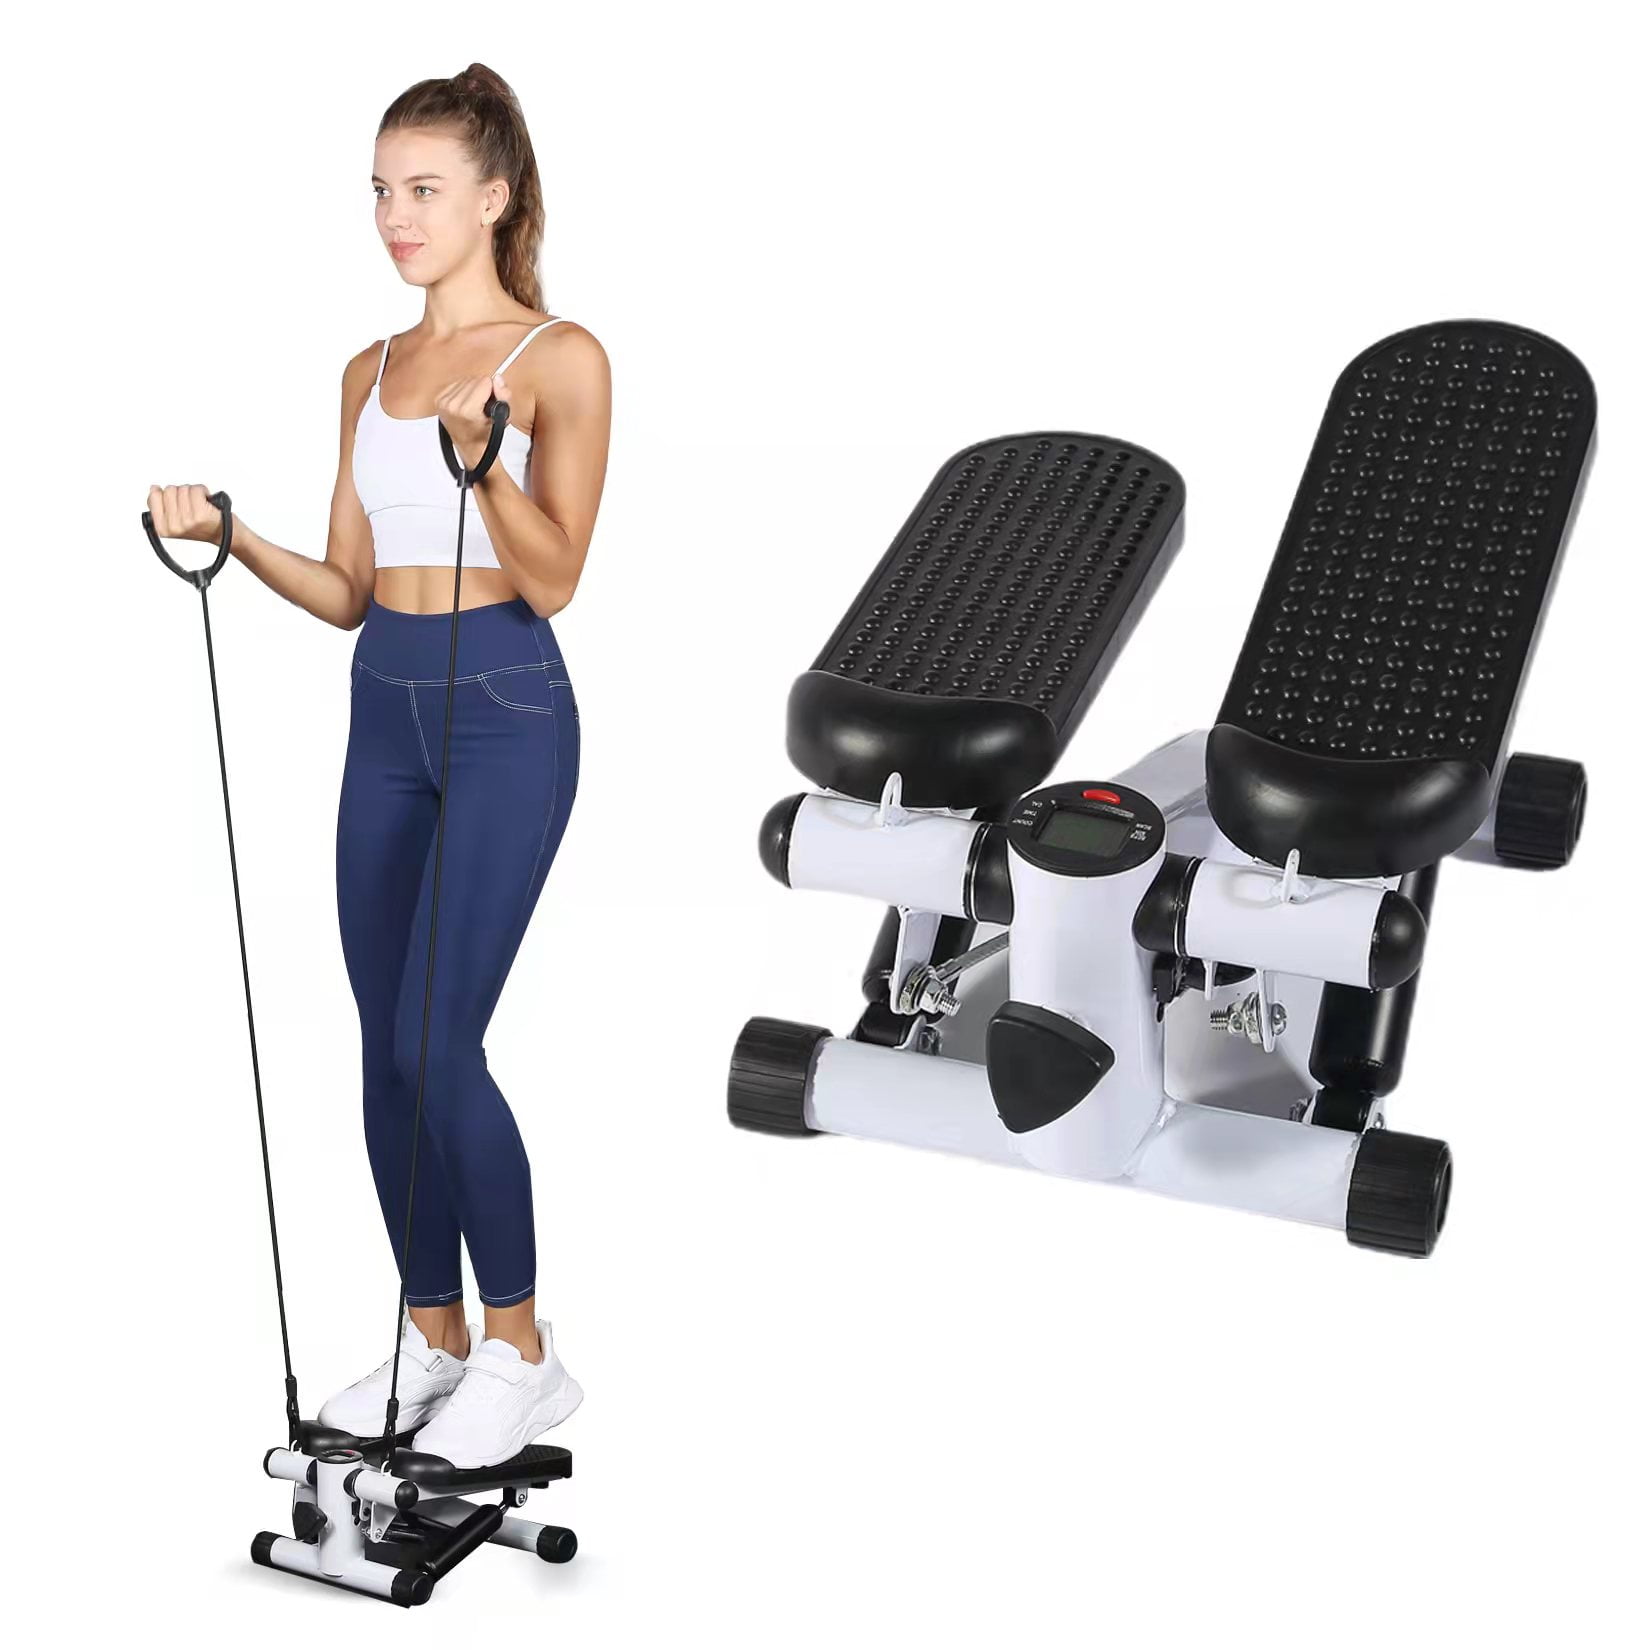 YSSOA Mini Stepper with Resistance Band, Stair Stepping Fitness Exercise  Home Workout Equipment for Full Body Workout,Black